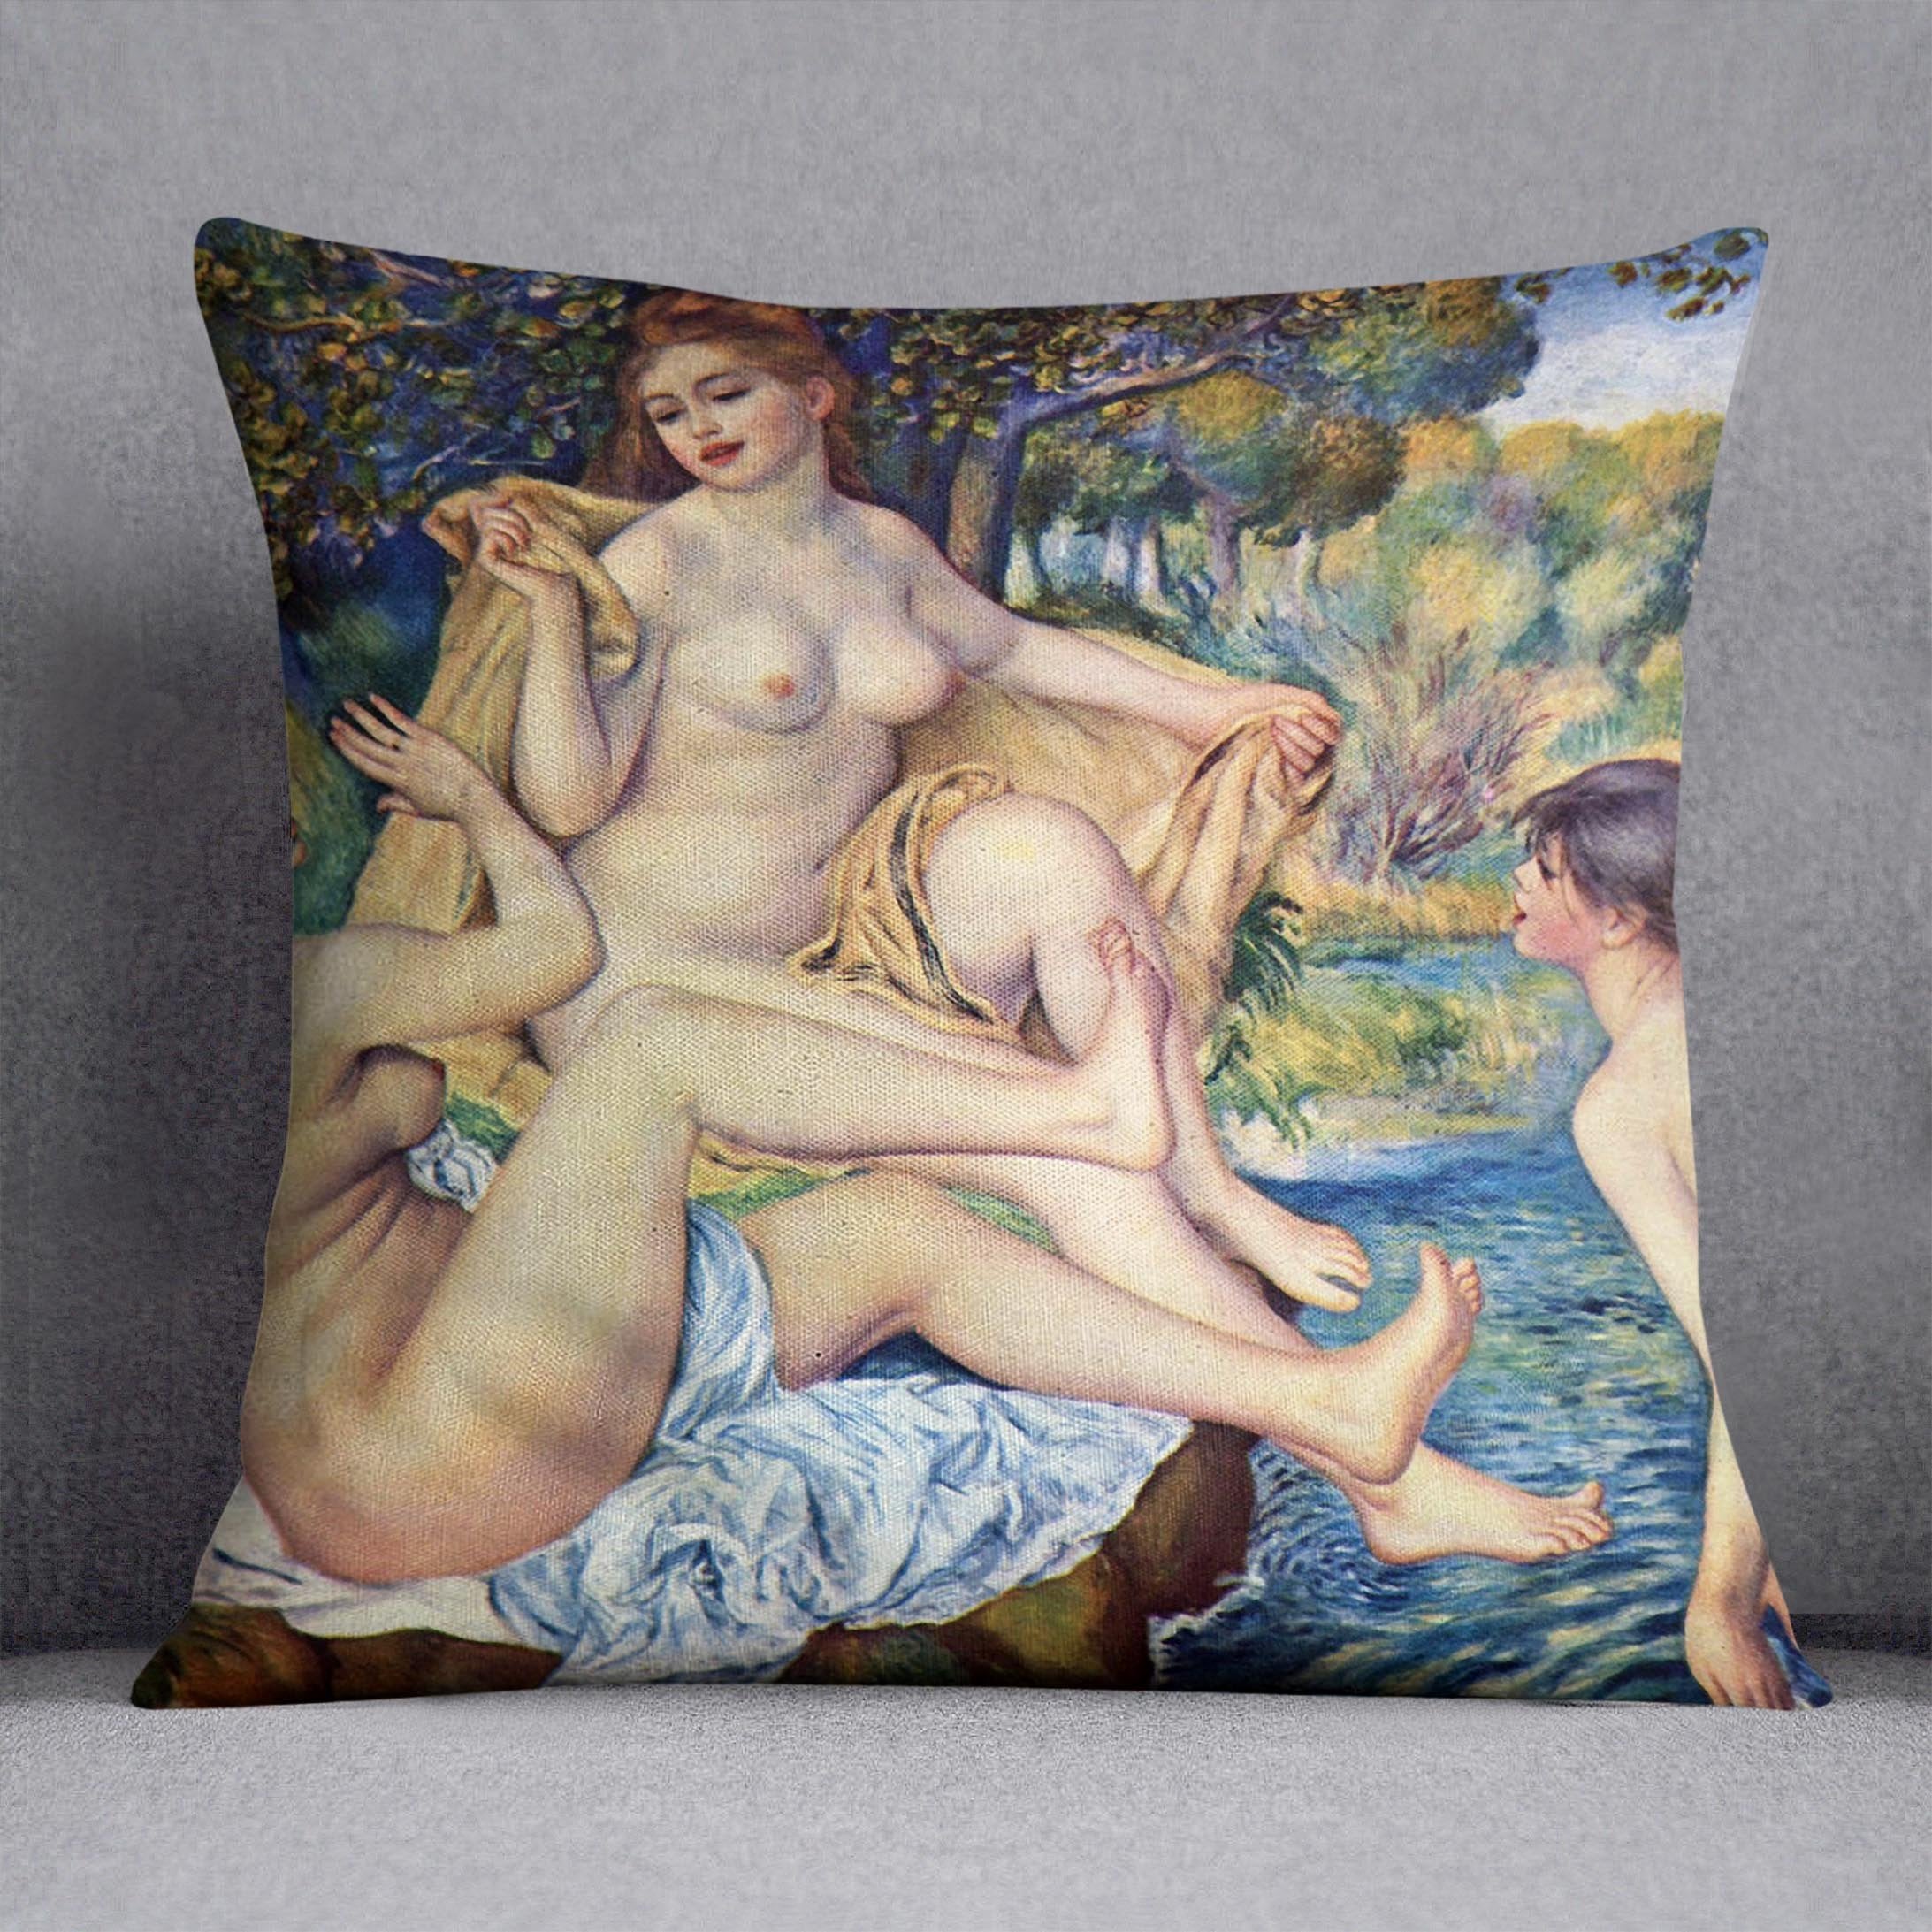 The Large Bathers by Renoir Throw Pillow